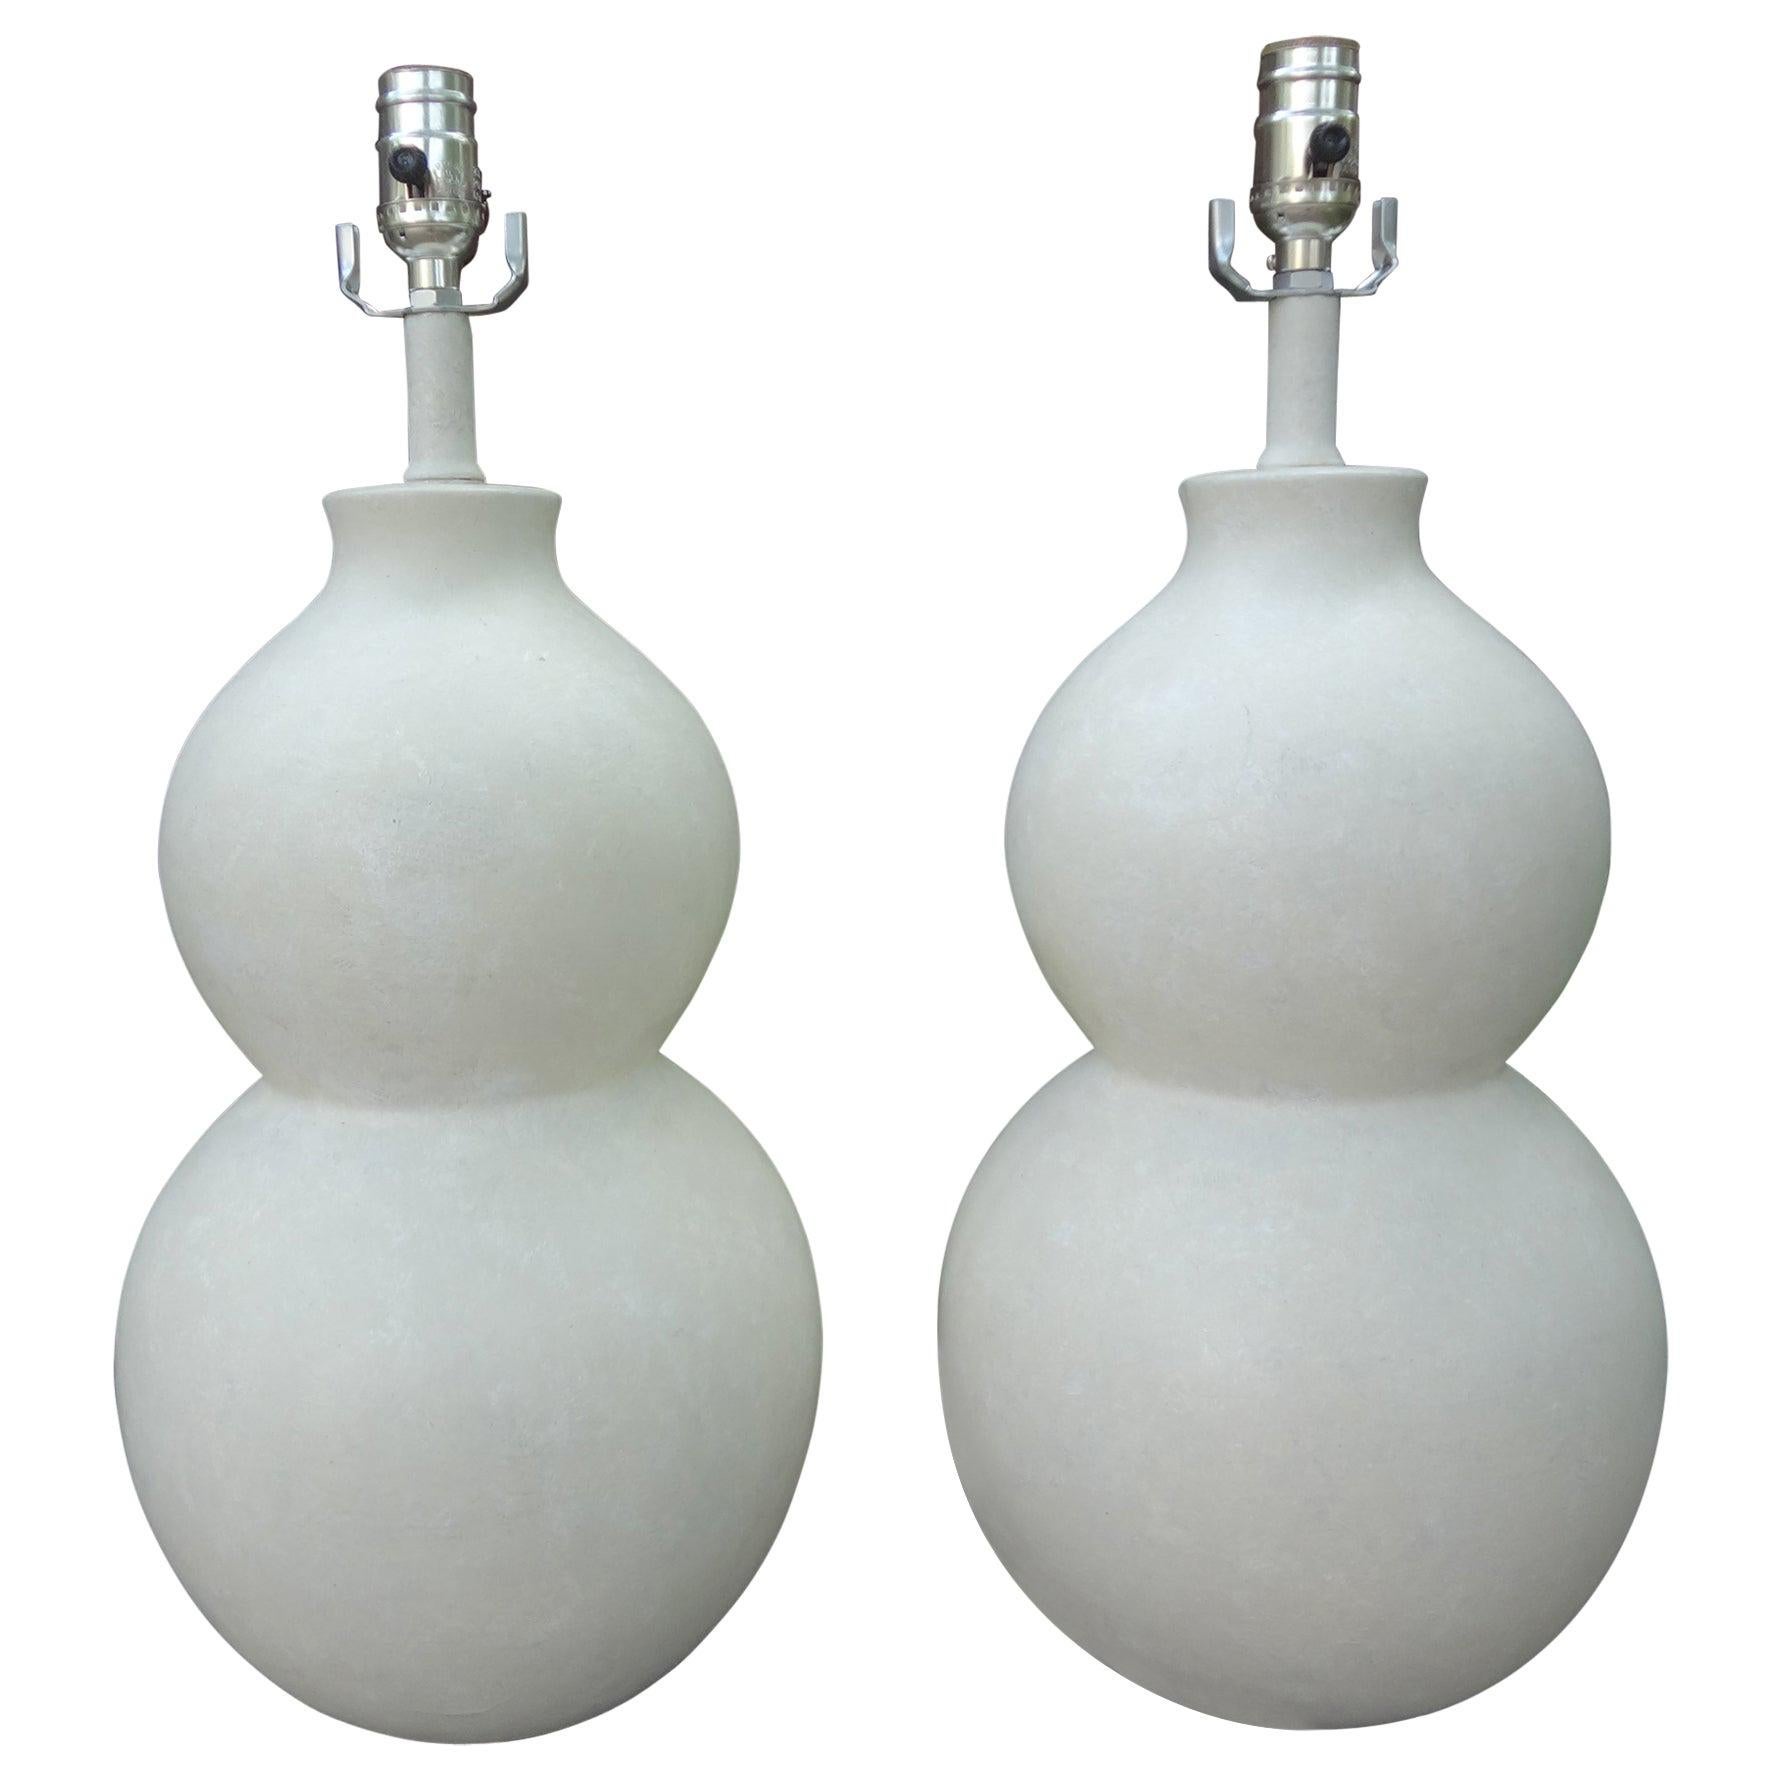 Stunning pair of Mid-Century Modern plastered gourd lamps. These Hollywood Regency gourd shaped lamps have a beautiful plaster finish and have been newly wired to U.S specifications with new sockets.